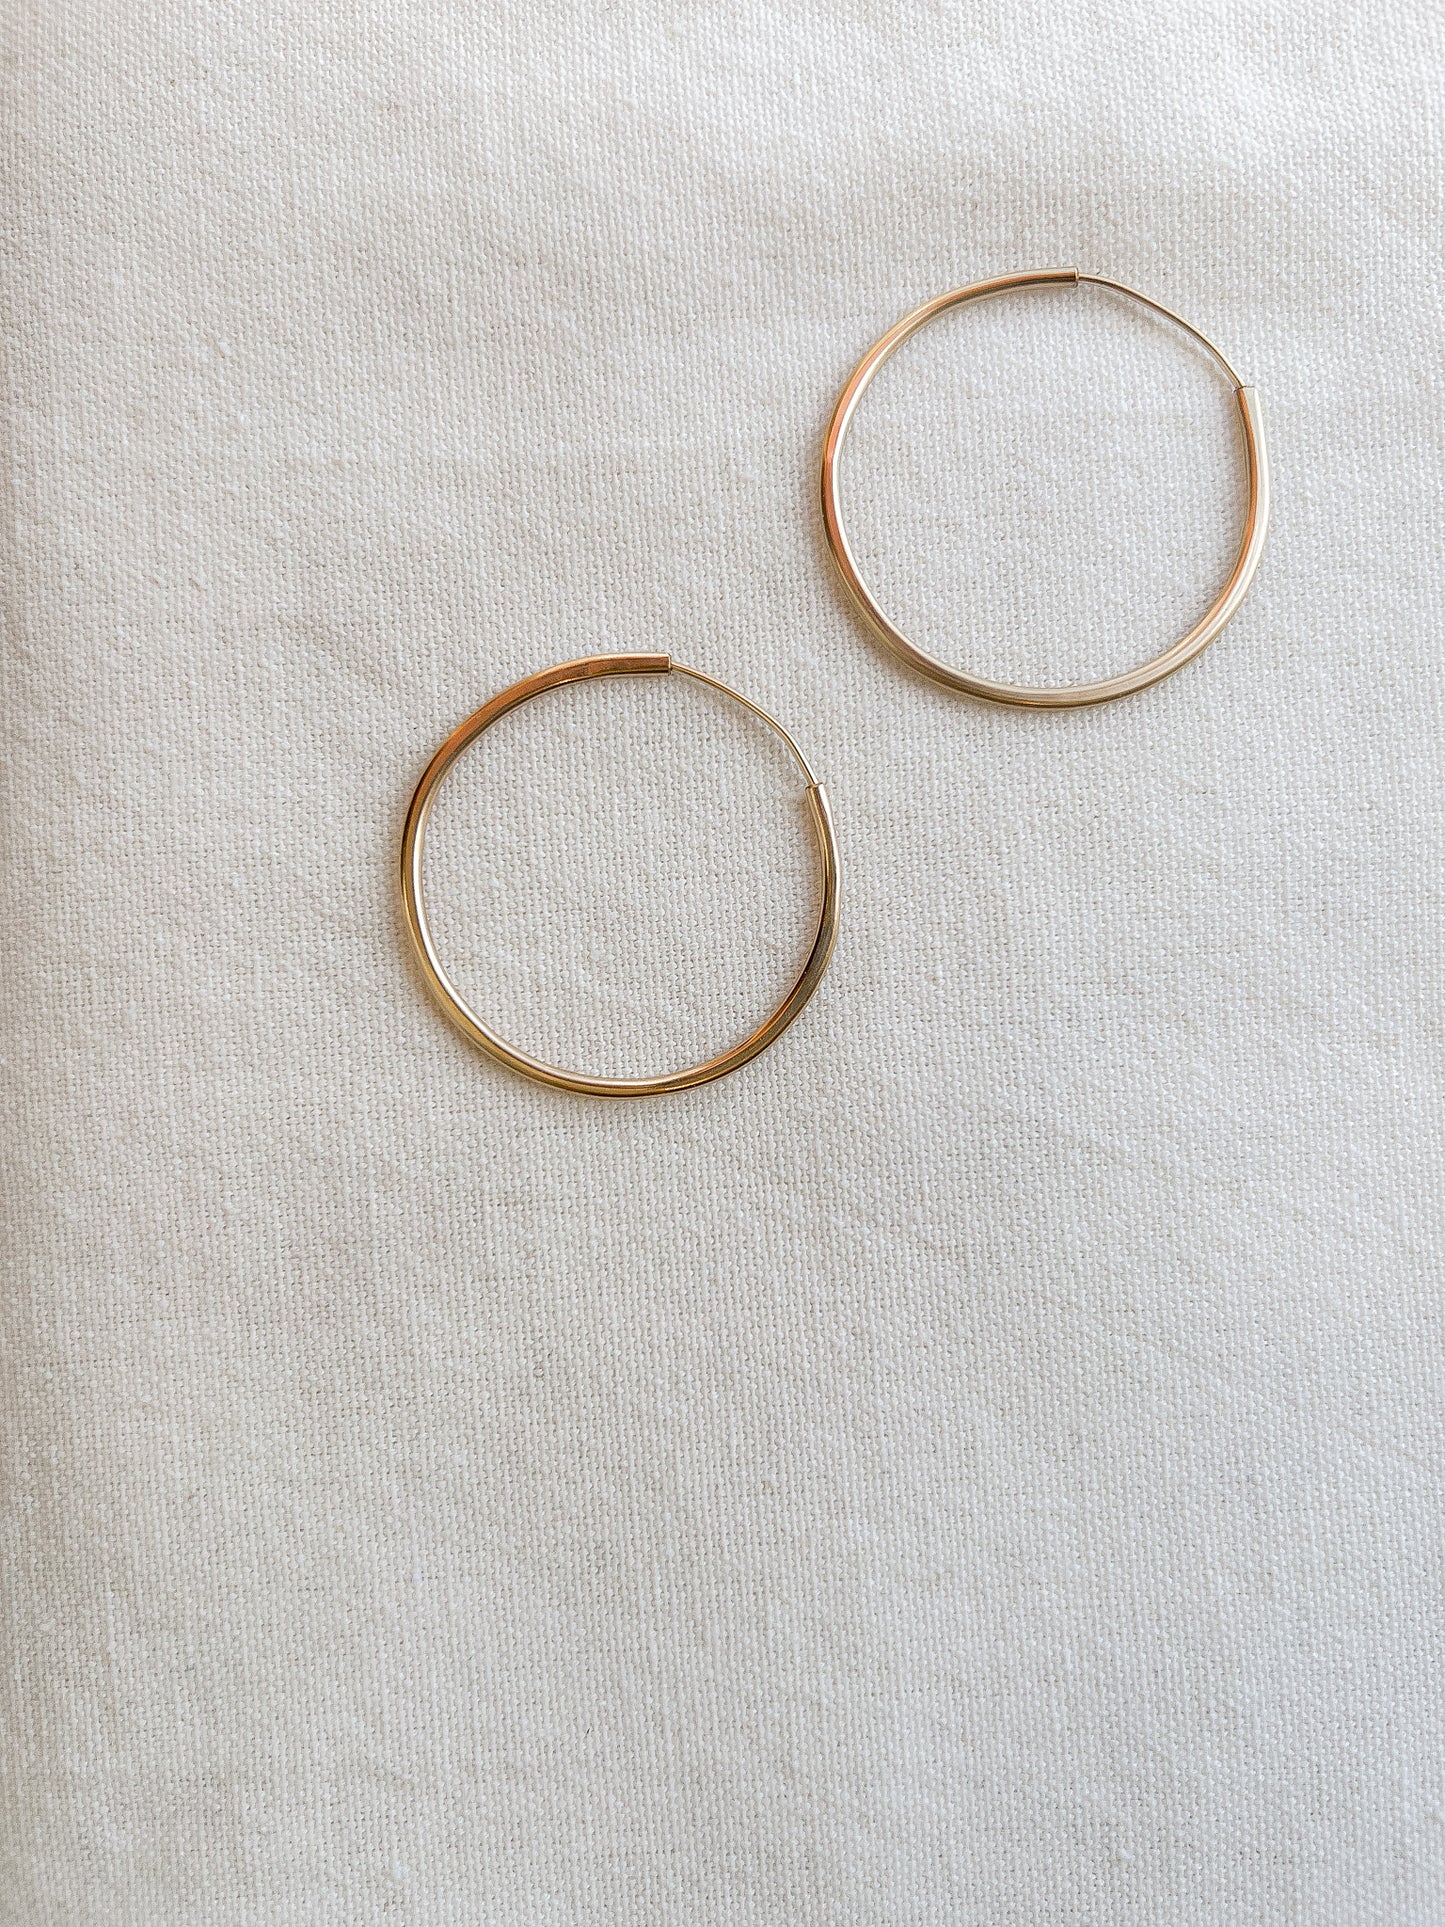 Simple, thin gold hoops that one can wear for any occasion.